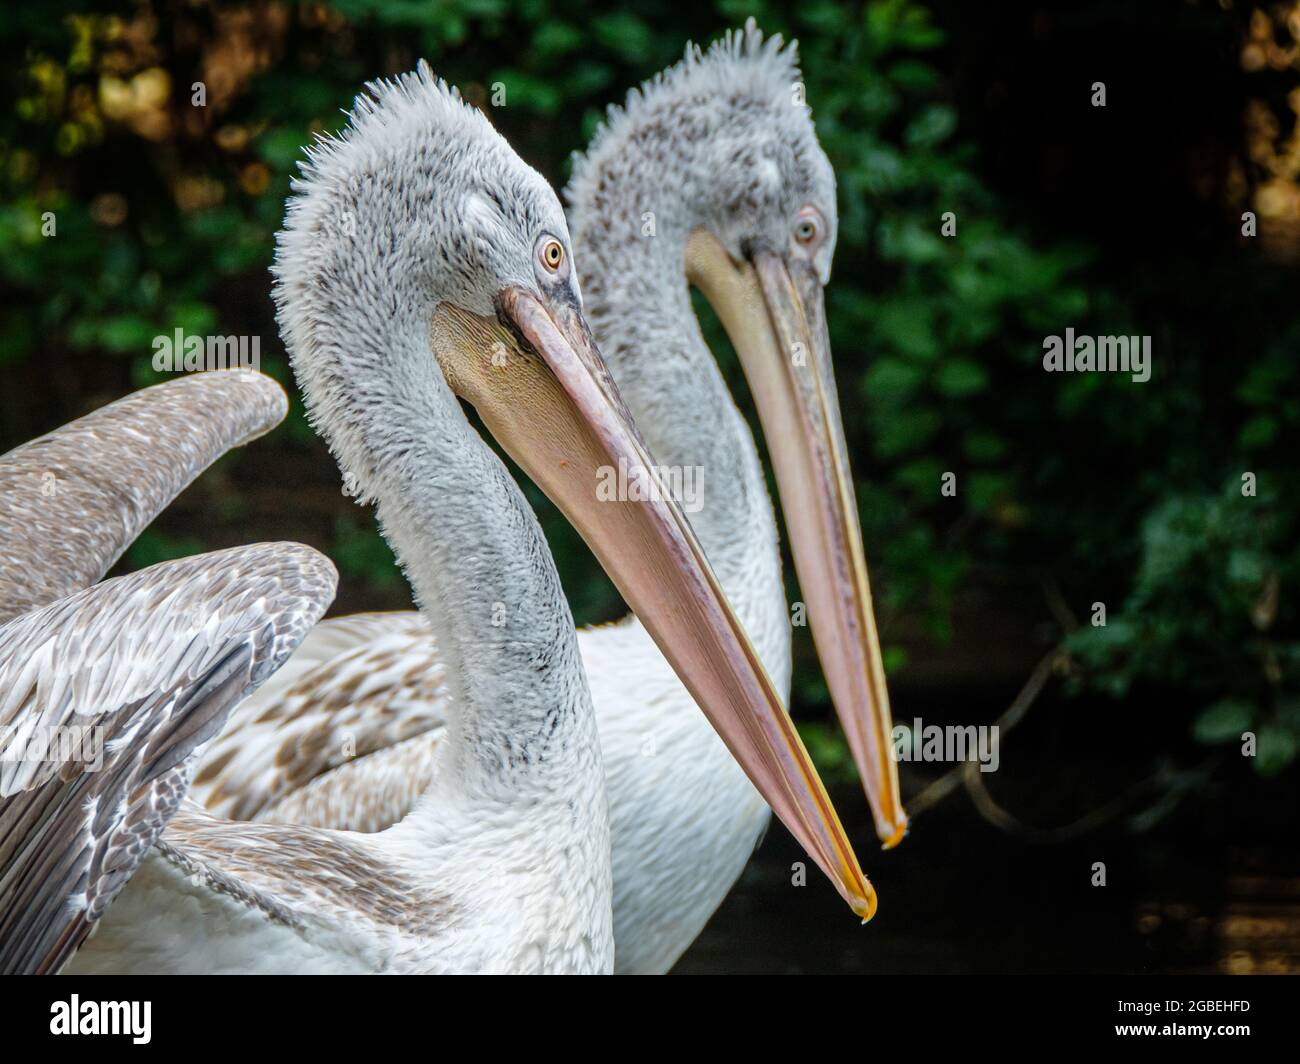 A close up of a Dalmatian Pelican and a second one in soft focus behind Stock Photo